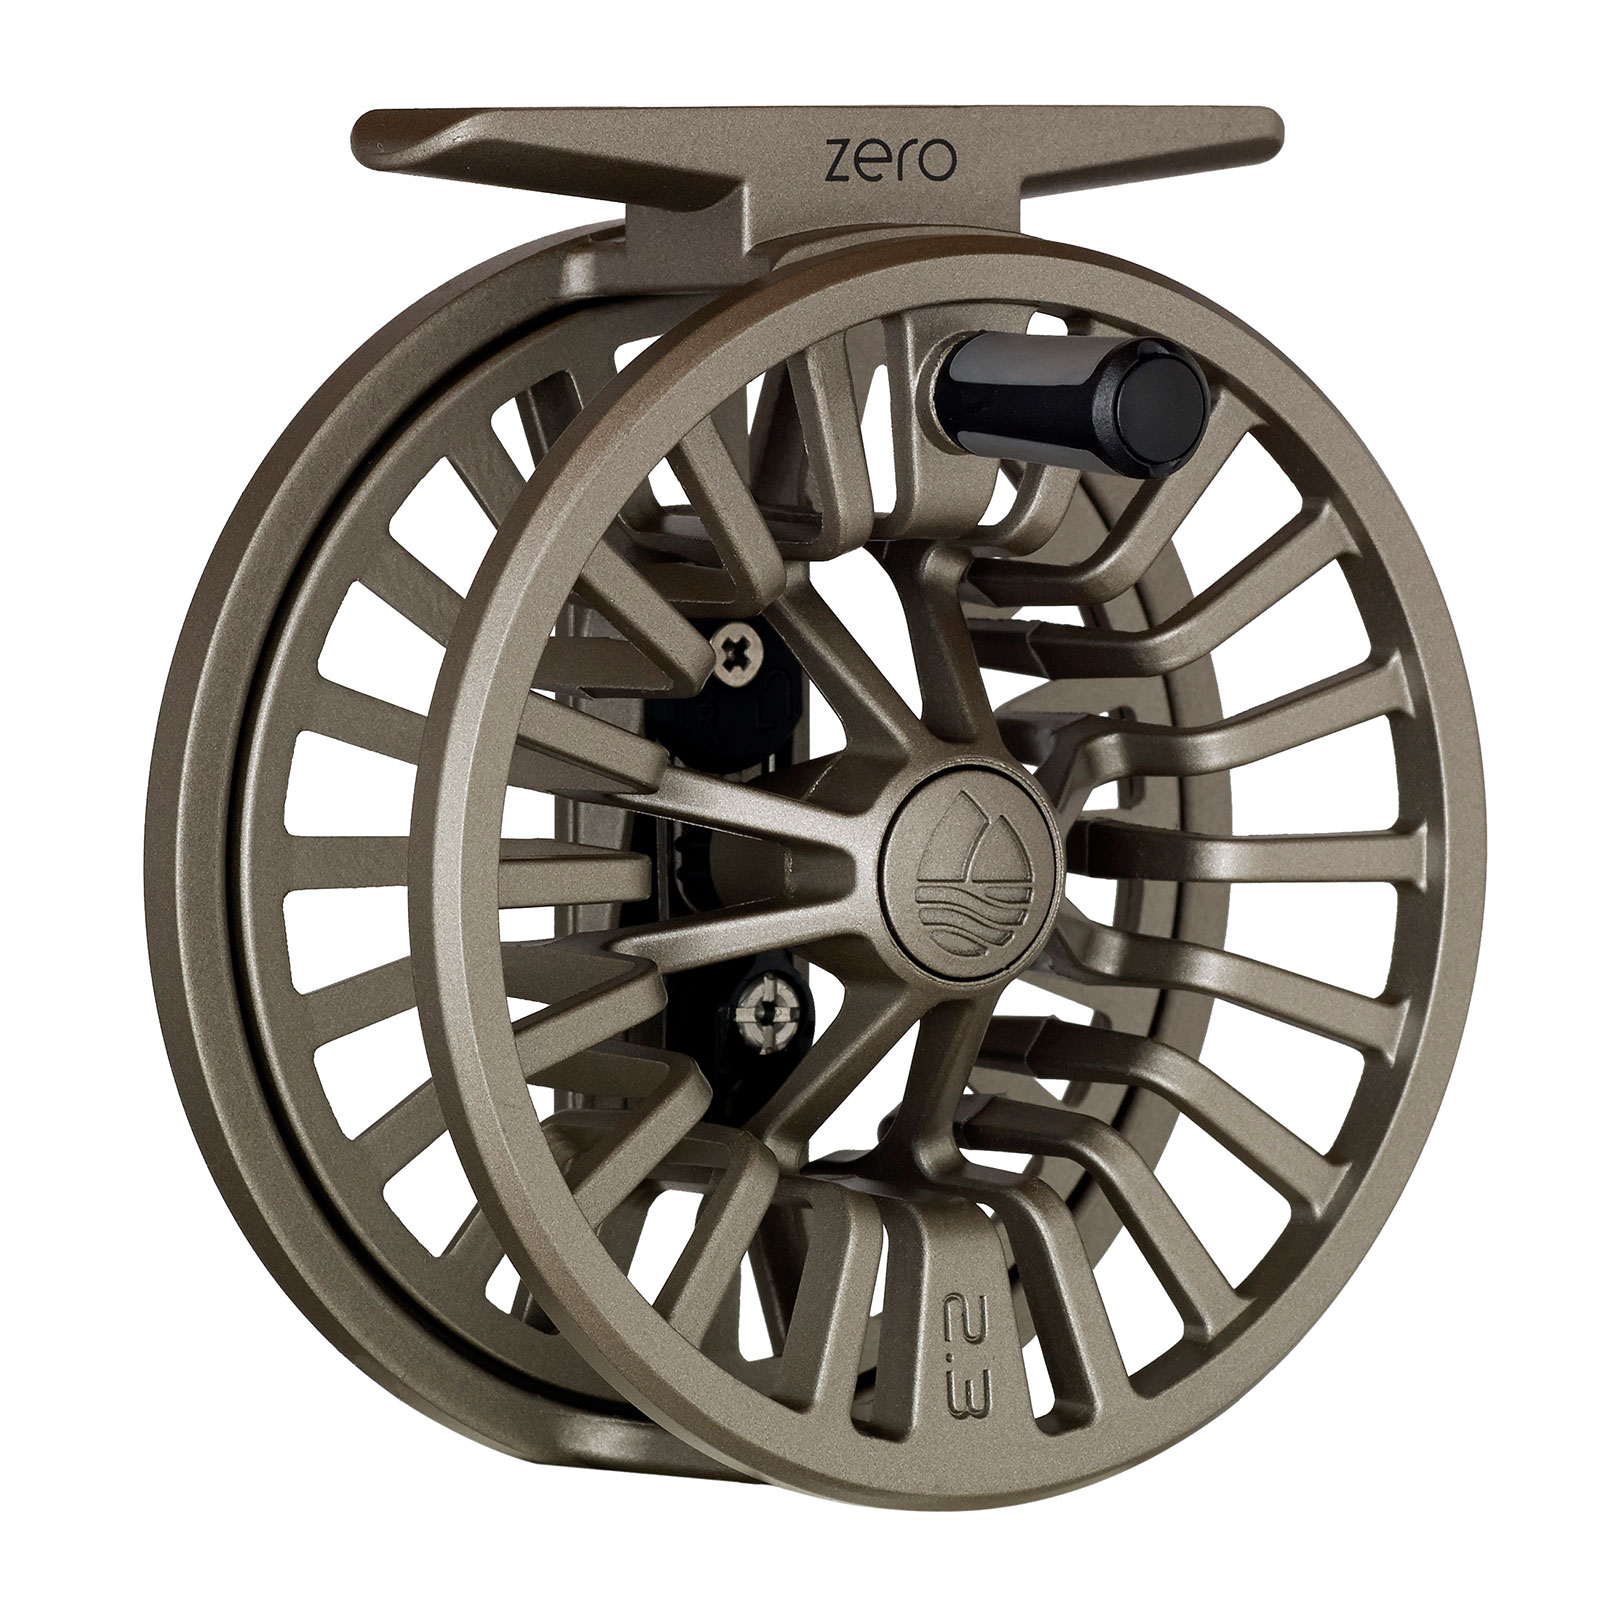 Redington Zero Fly Fishing Reel, Lightweight Design for Trout, Clicker Drag  System, Dreamsicle, 4/5 in Dubai - UAE